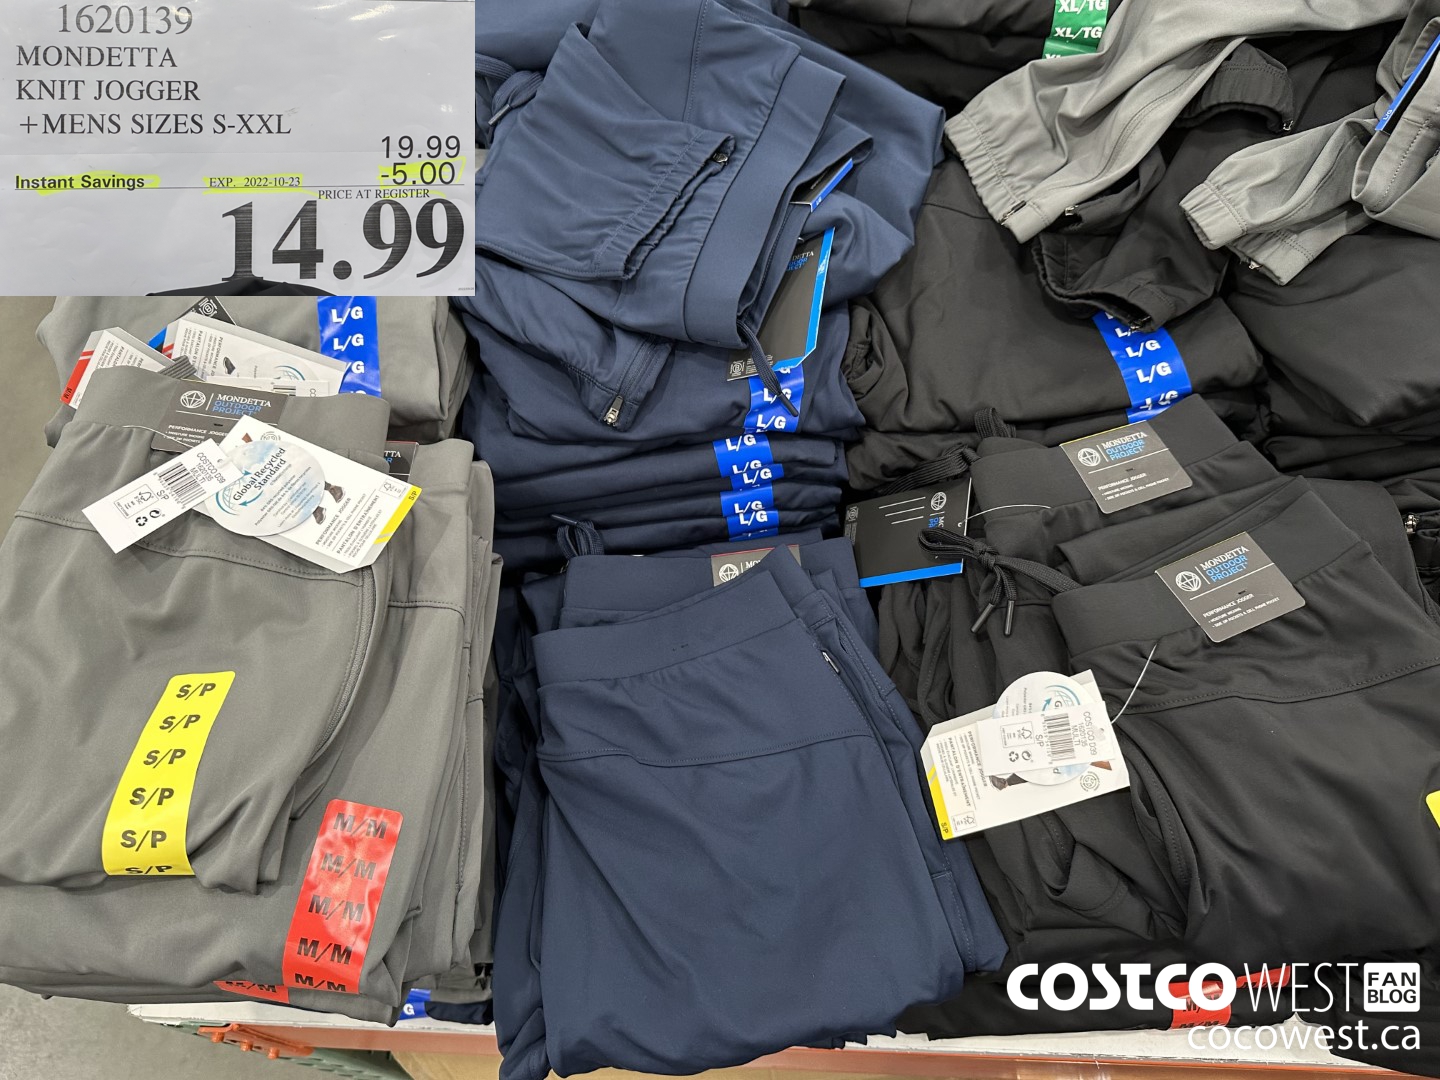 Costco Flyer & Costco Sale Items for Sep 26 - Oct 2, 2022 for BC, AB, MB,  SK - Costco West Fan Blog